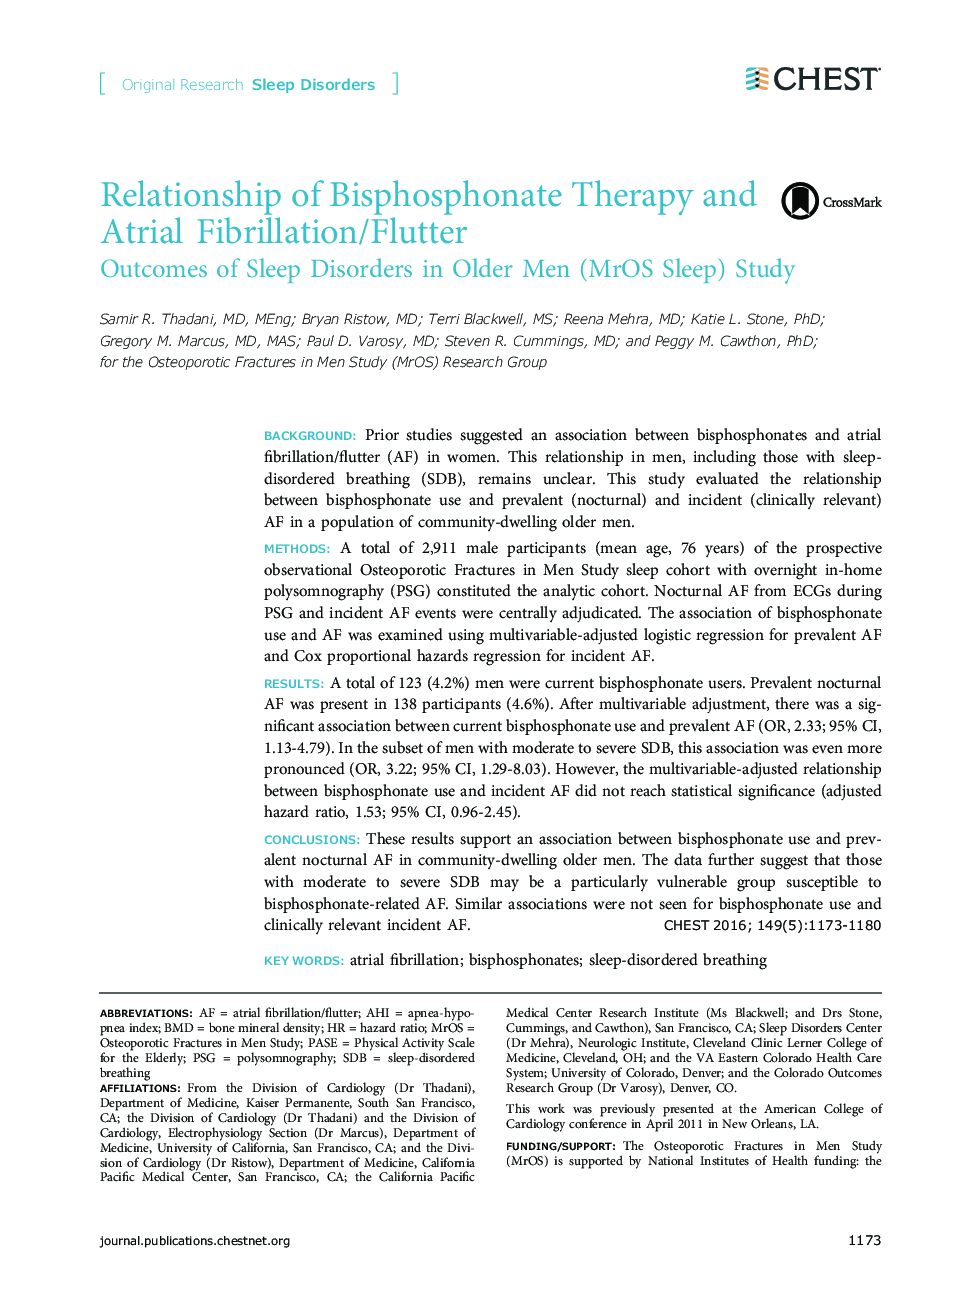 Relationship of Bisphosphonate Therapy and Atrial Fibrillation/Flutter : Outcomes of Sleep Disorders in Older Men (MrOS Sleep) Study